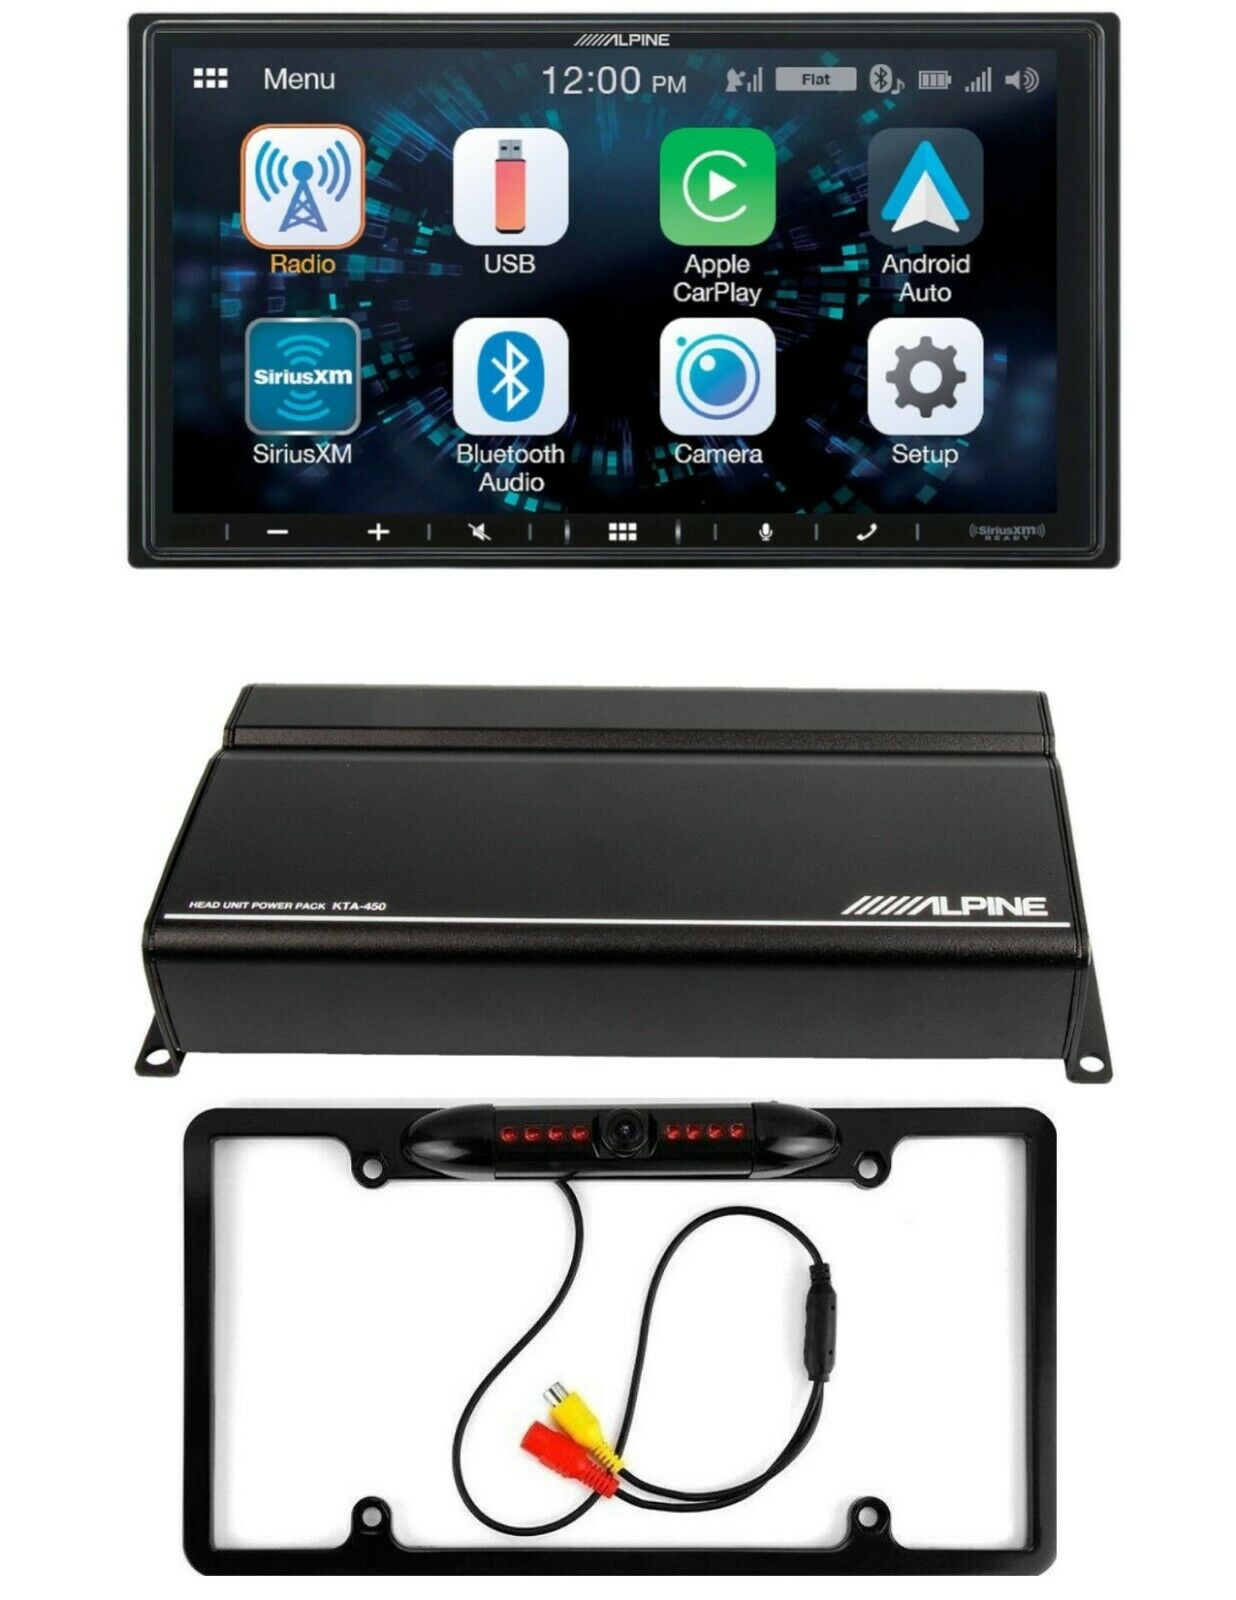 Alpine ILX-W670 + Alpine KTA-450 + CAM1800B Car Stereo Bundle 7 Inch Mechless Ultra-shallow AV System with Apple Carplay, Android Auto + 400-watt Power Pack Amplifier & Absolute CAM1800B Black License Plate Rear View Camera